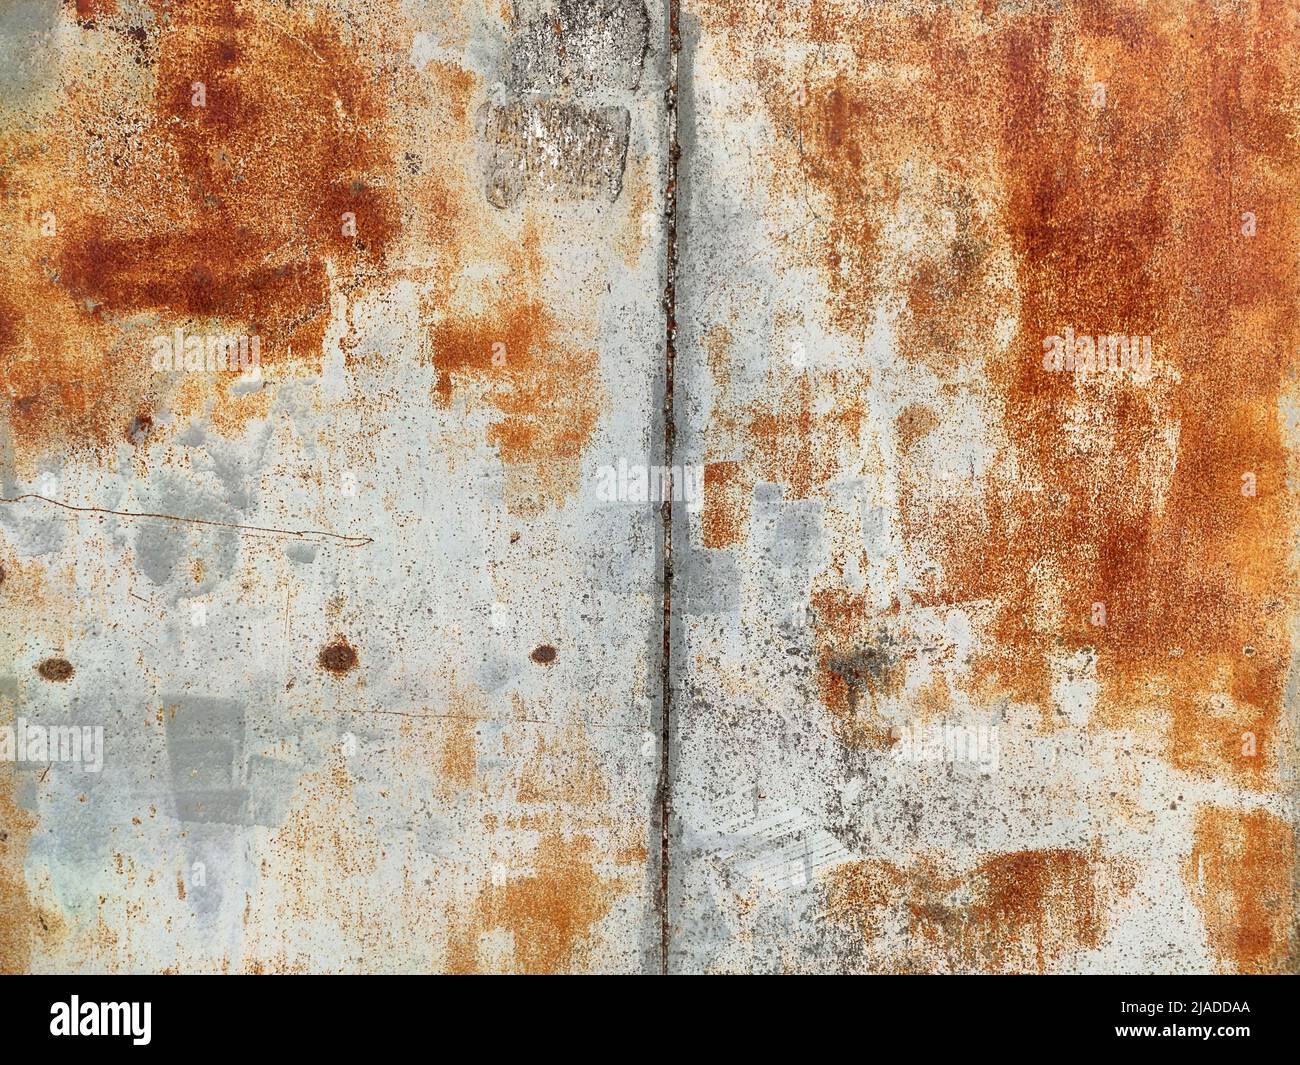 Rusty corrosion and oxidized background. Grunge rusted metal texture background. High resolution image of oxidized iron steel sheet wall. Stock Photo